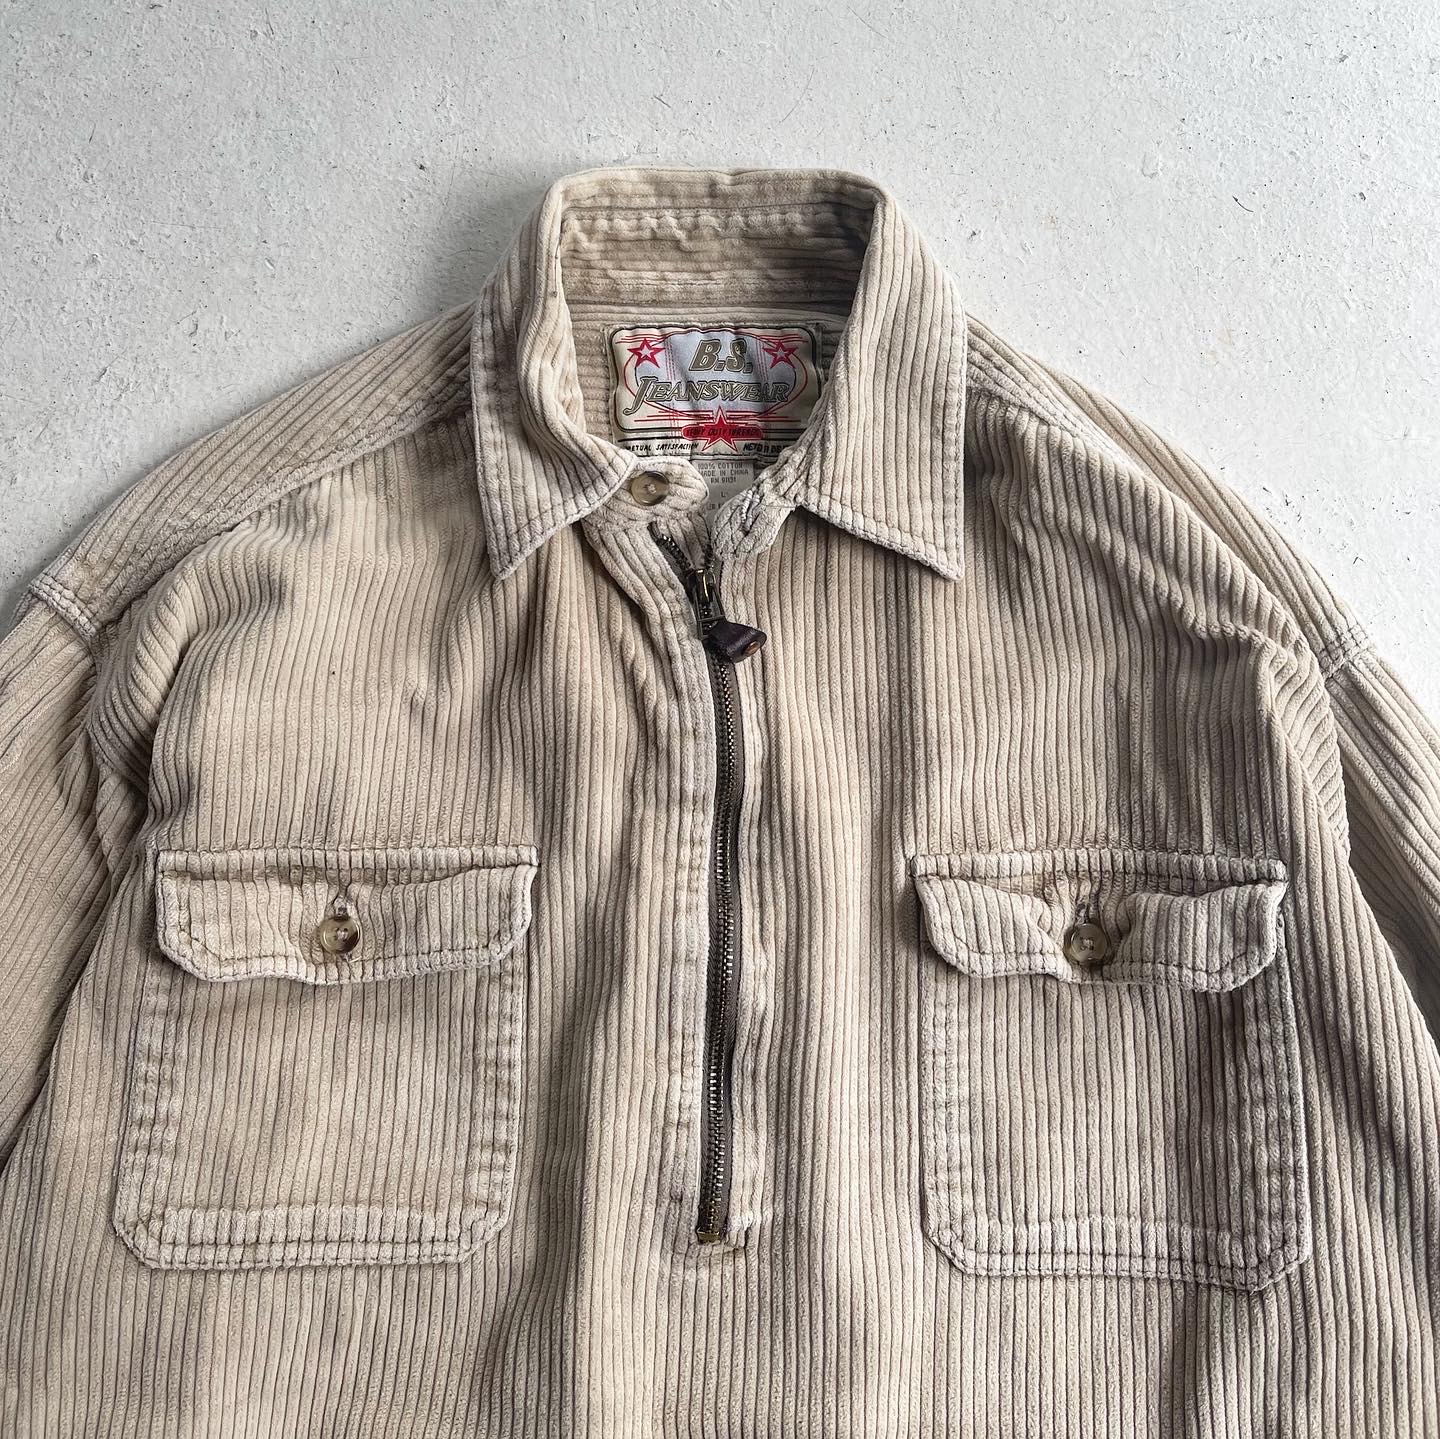 1990s 太畝corduroy pullover  shirt size L